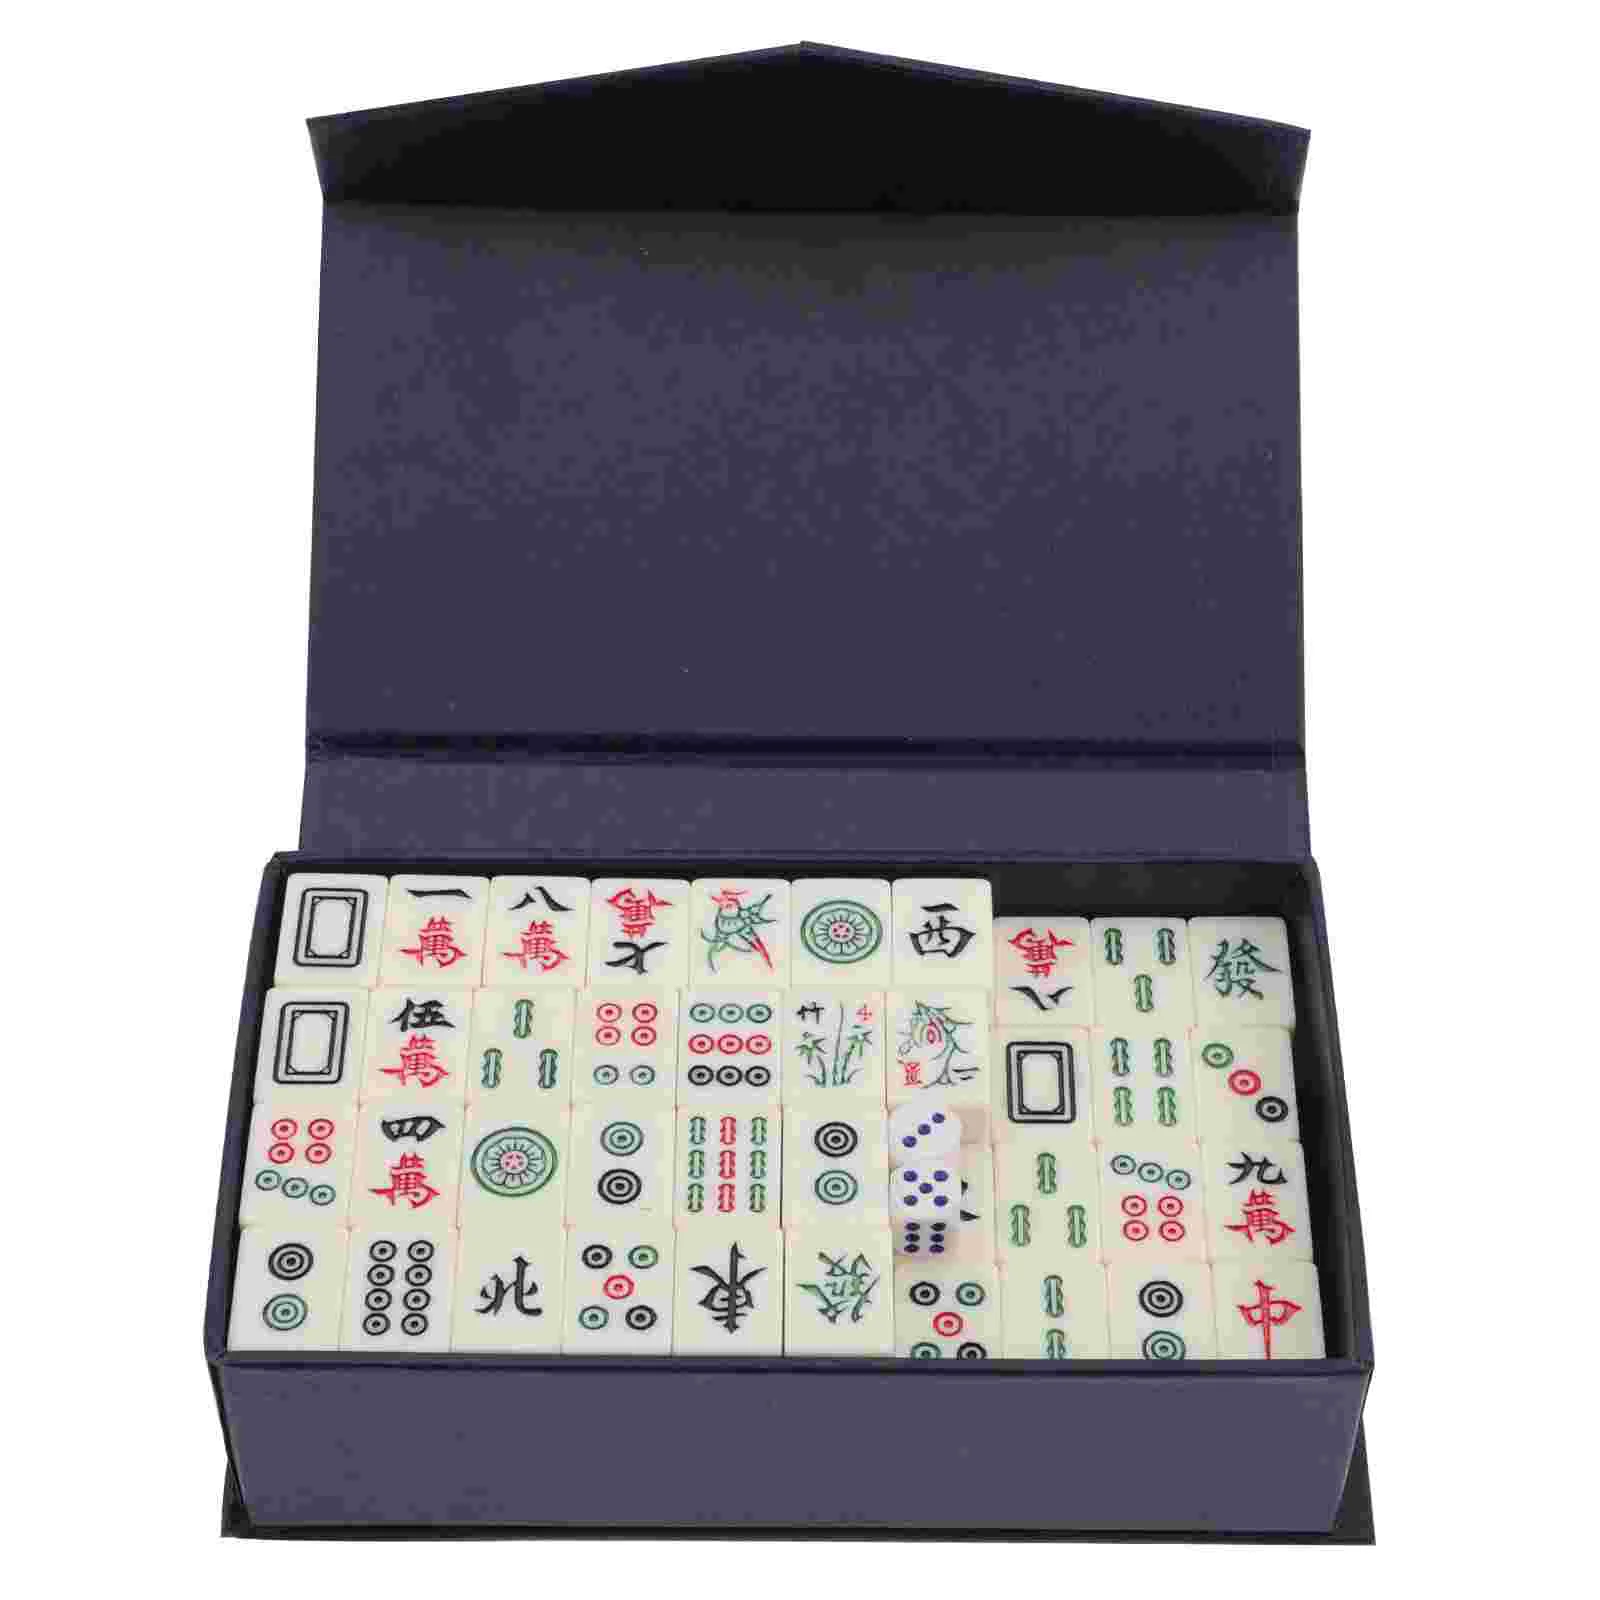 1 Set Mini Mahjong Family Board Party Mahjong with Storage Box family birthday reminder board decorative birthday tracker calendar plaque wall hanging decor with tags advent